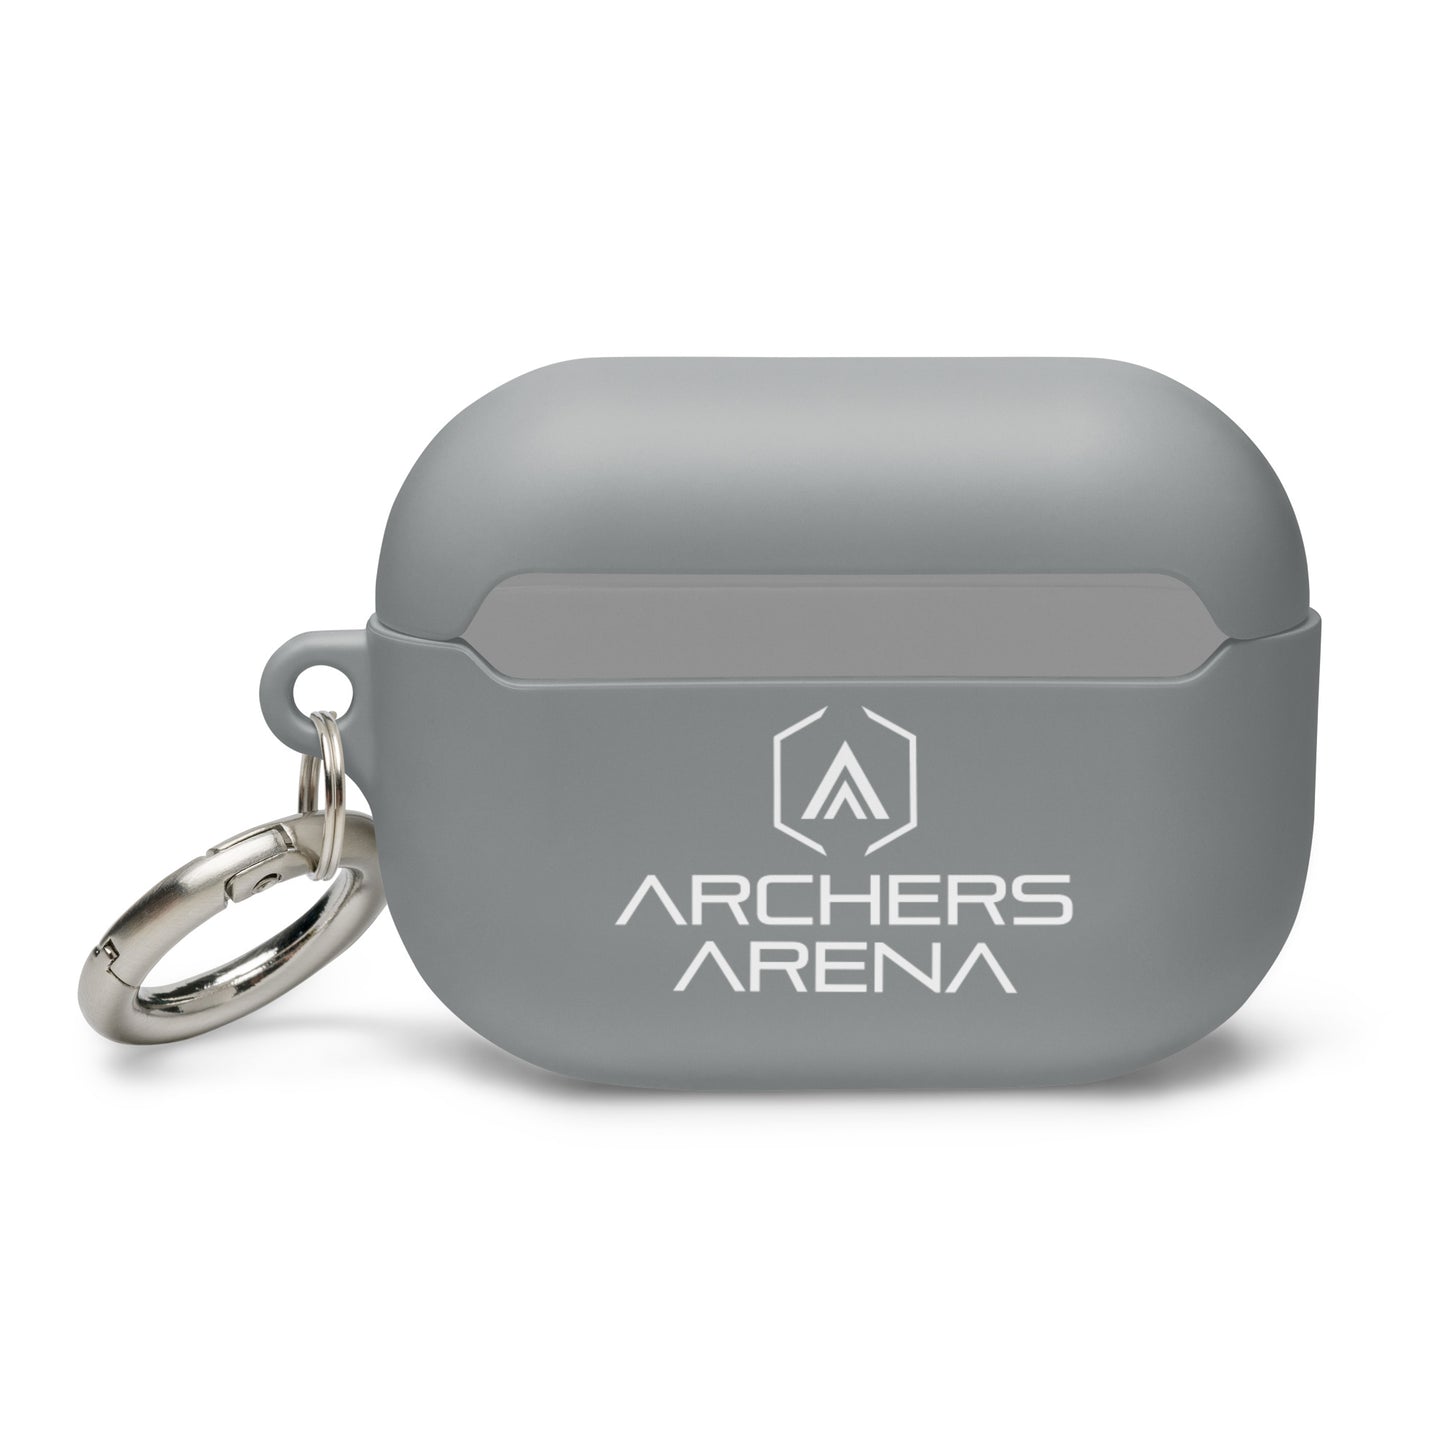 Archers Arena AirPods case